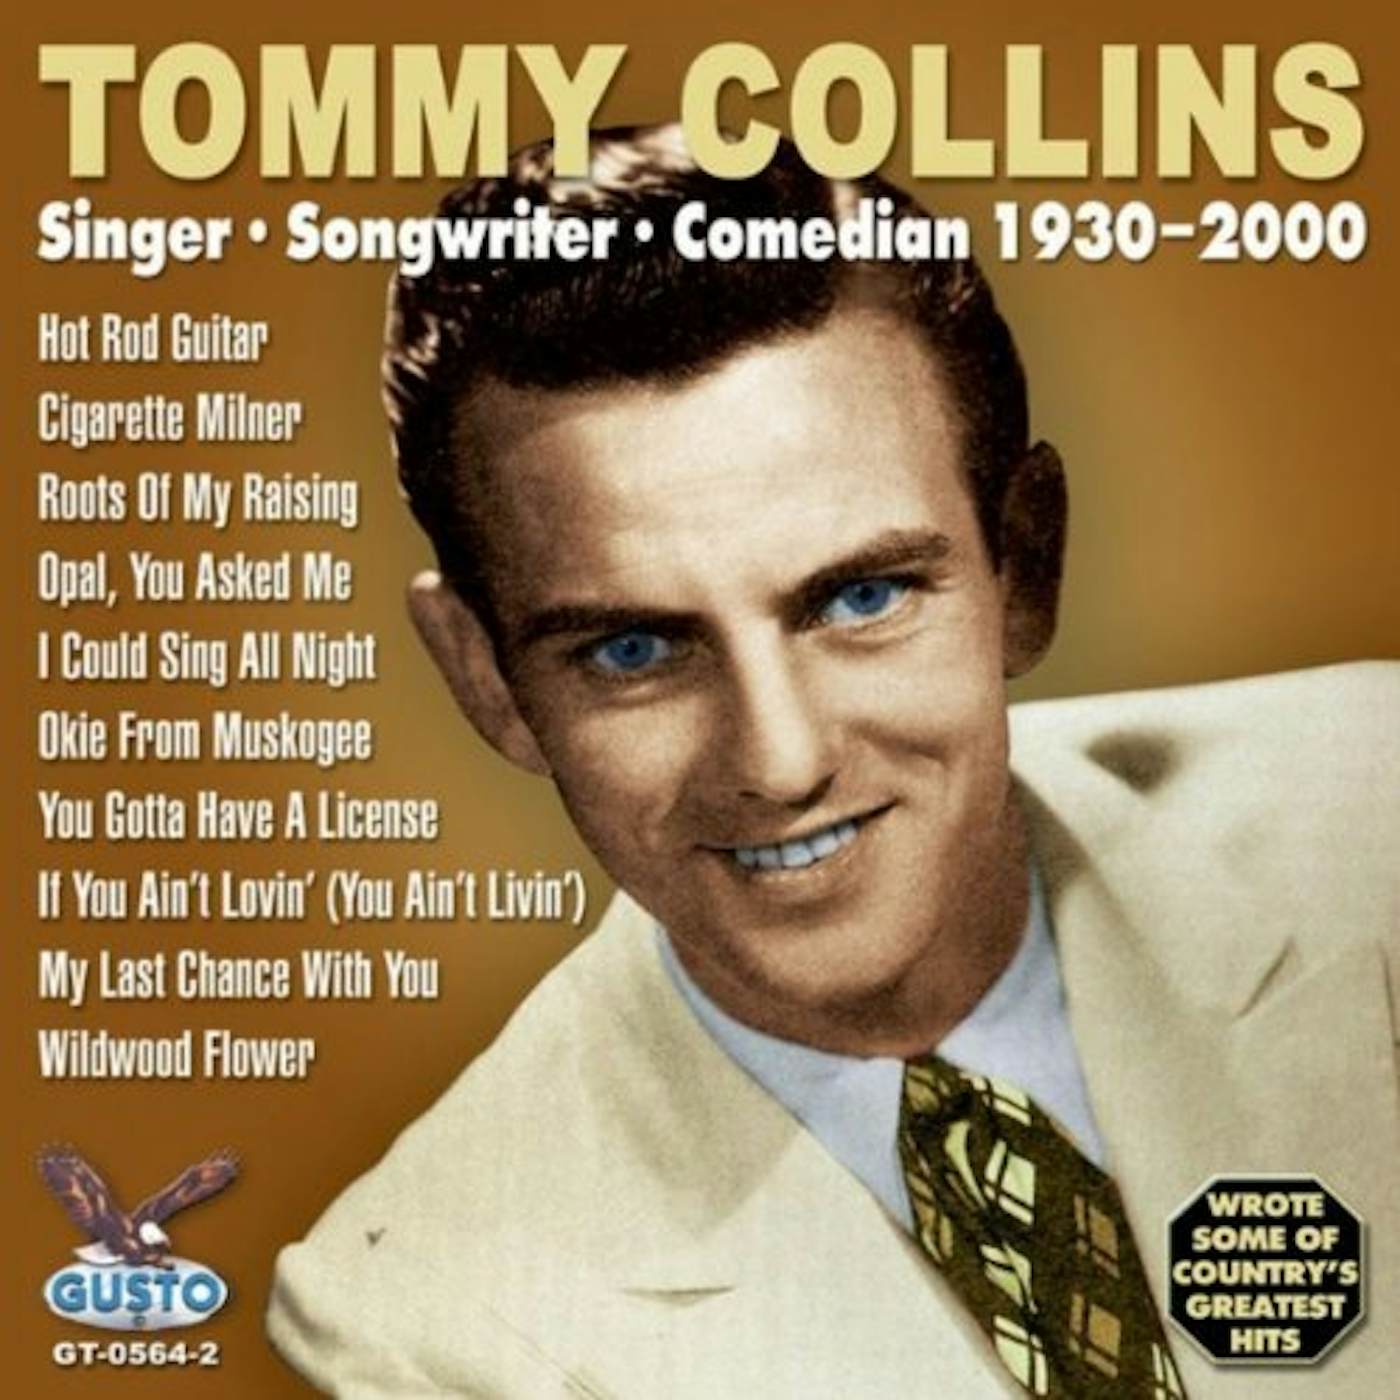 Tommy Collins SINGER-SONGWRITER CD